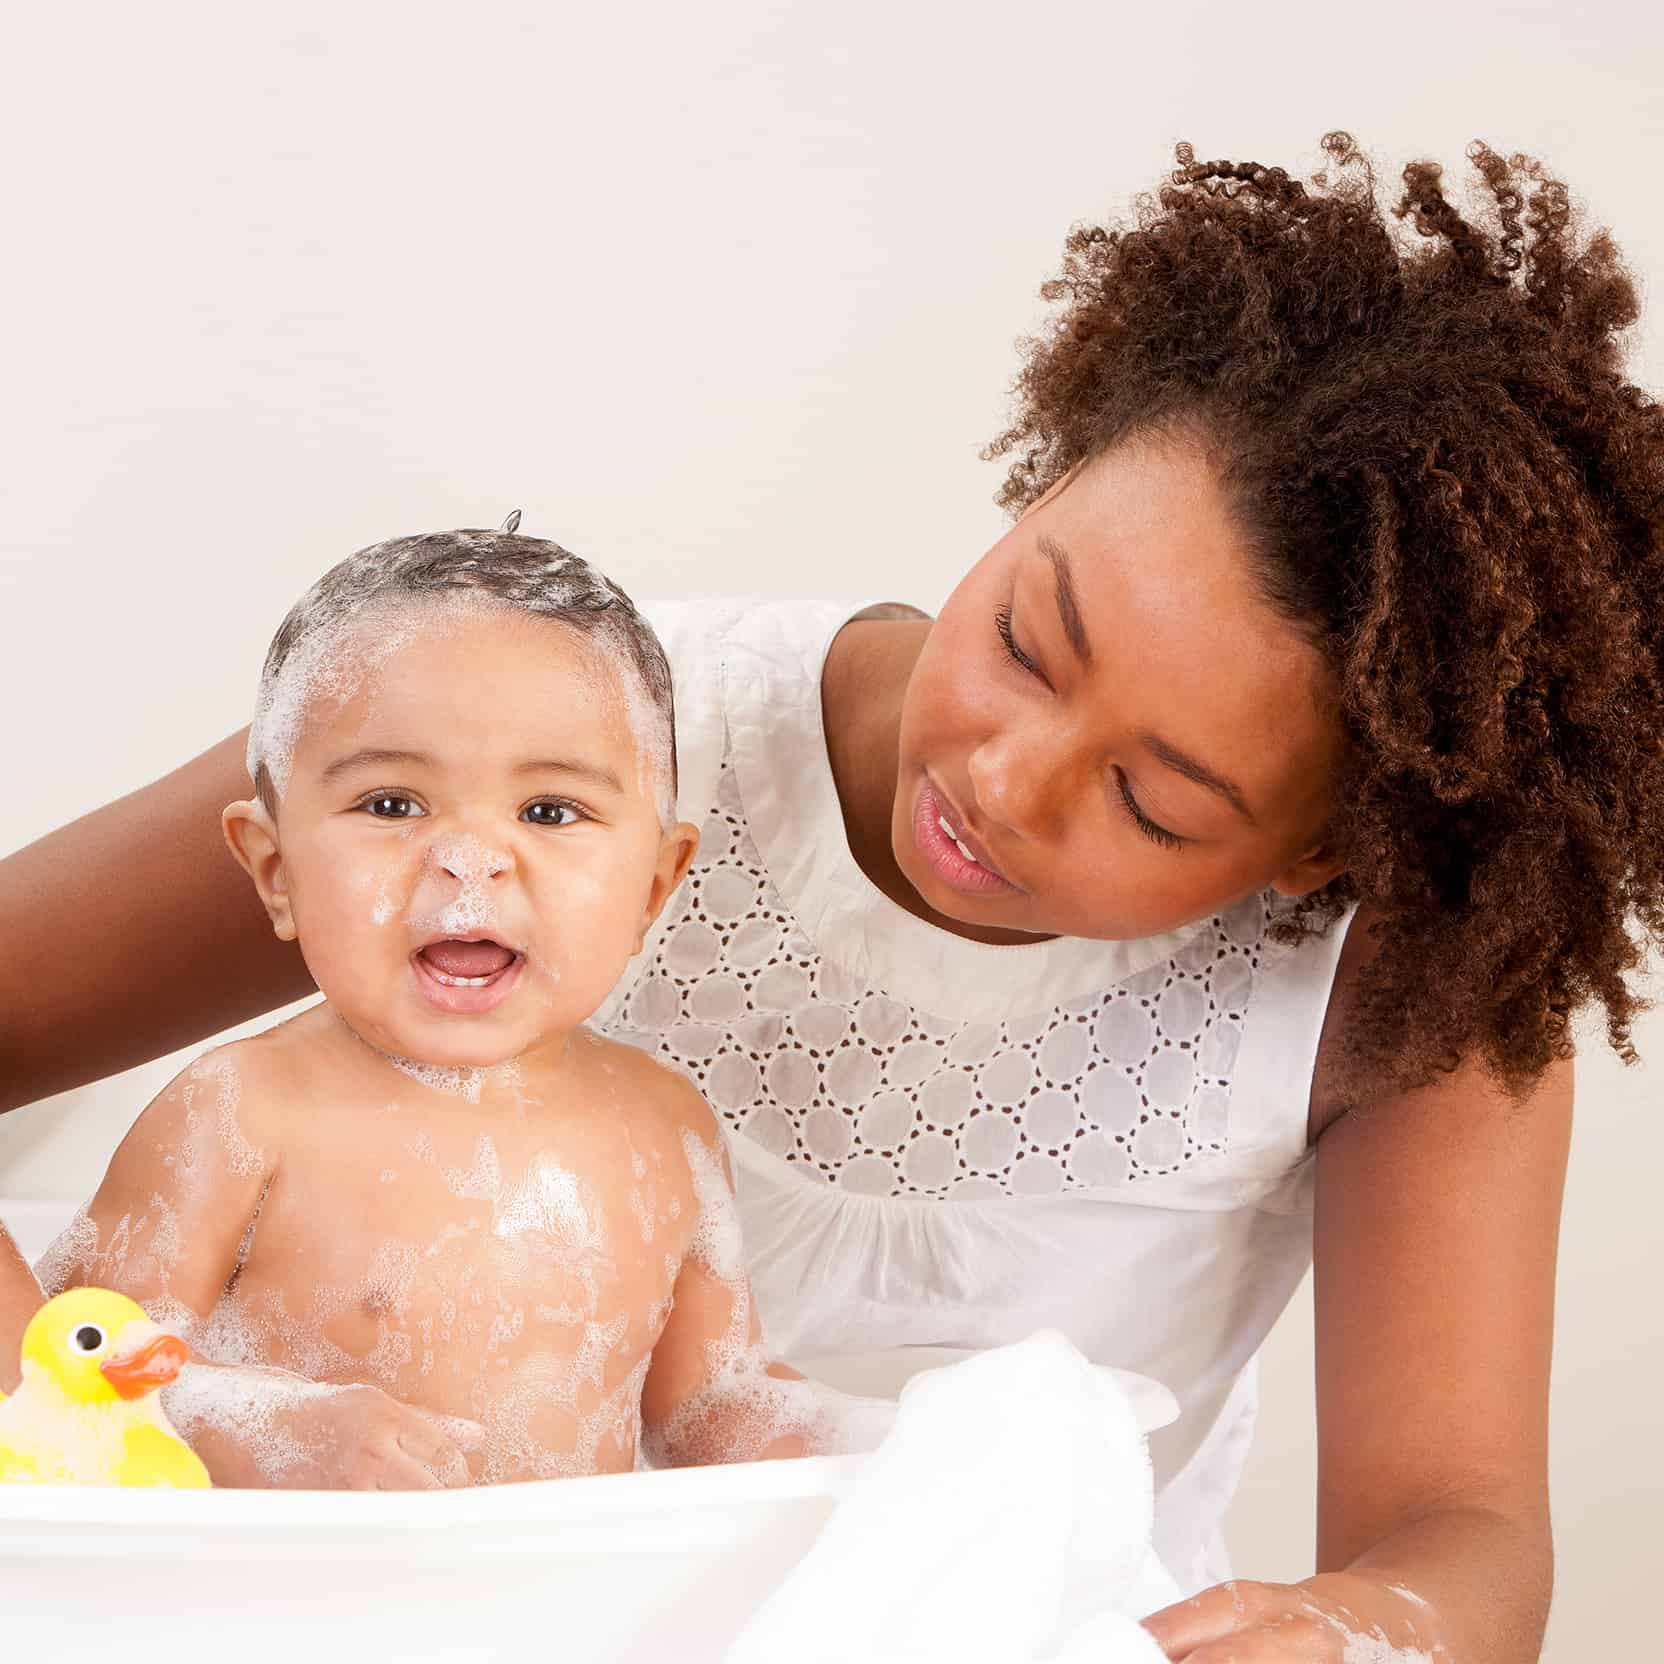 Mom providing healthier bath for baby with a whole house water filter